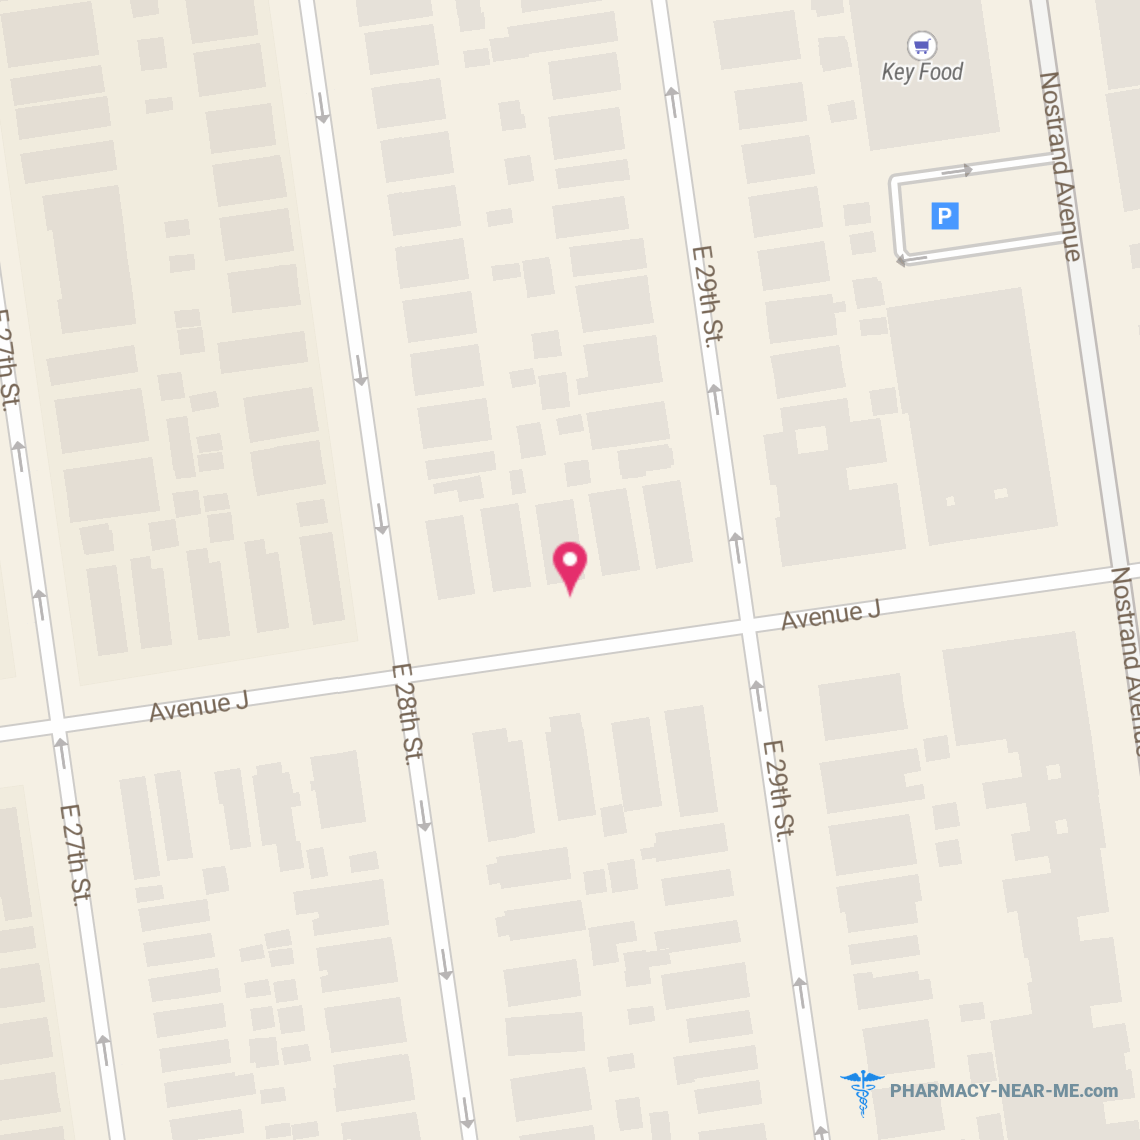 GS PHARMACY LLC - Pharmacy Hours, Phone, Reviews & Information: 1932 Nostrand Avenue, Brooklyn, New York 11210, United States